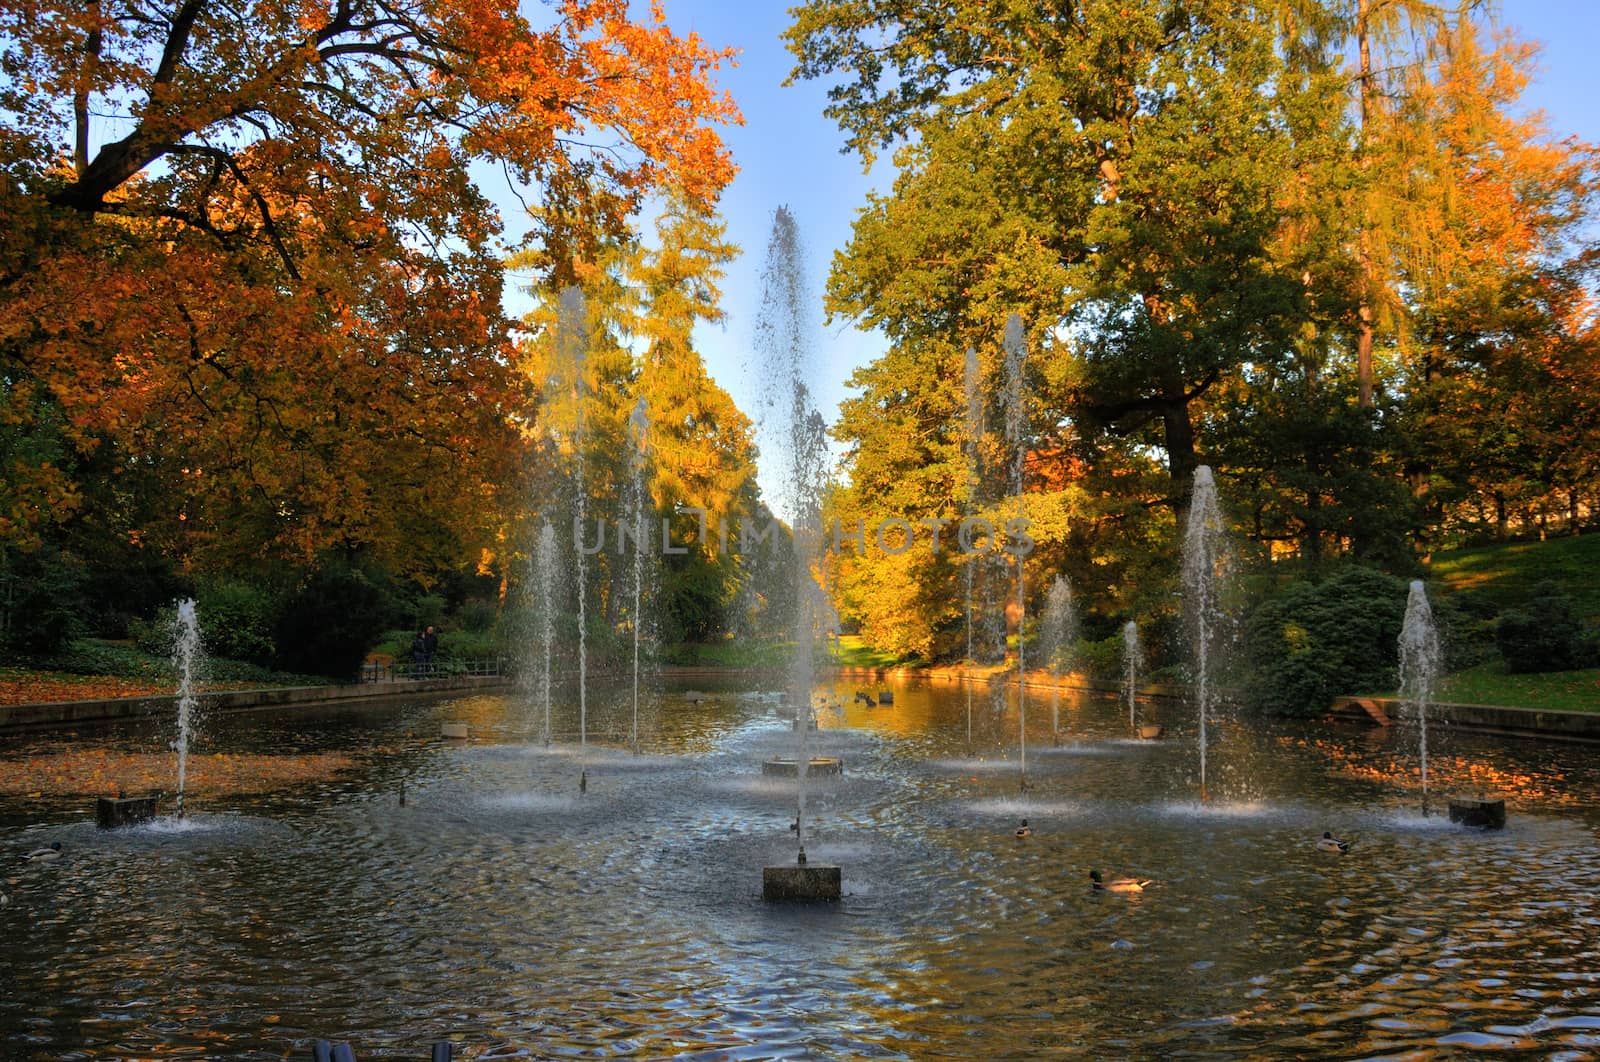 Autumn fontains at the Stadtschloss park in Fulda, Hessen, Germa by Eagle2308